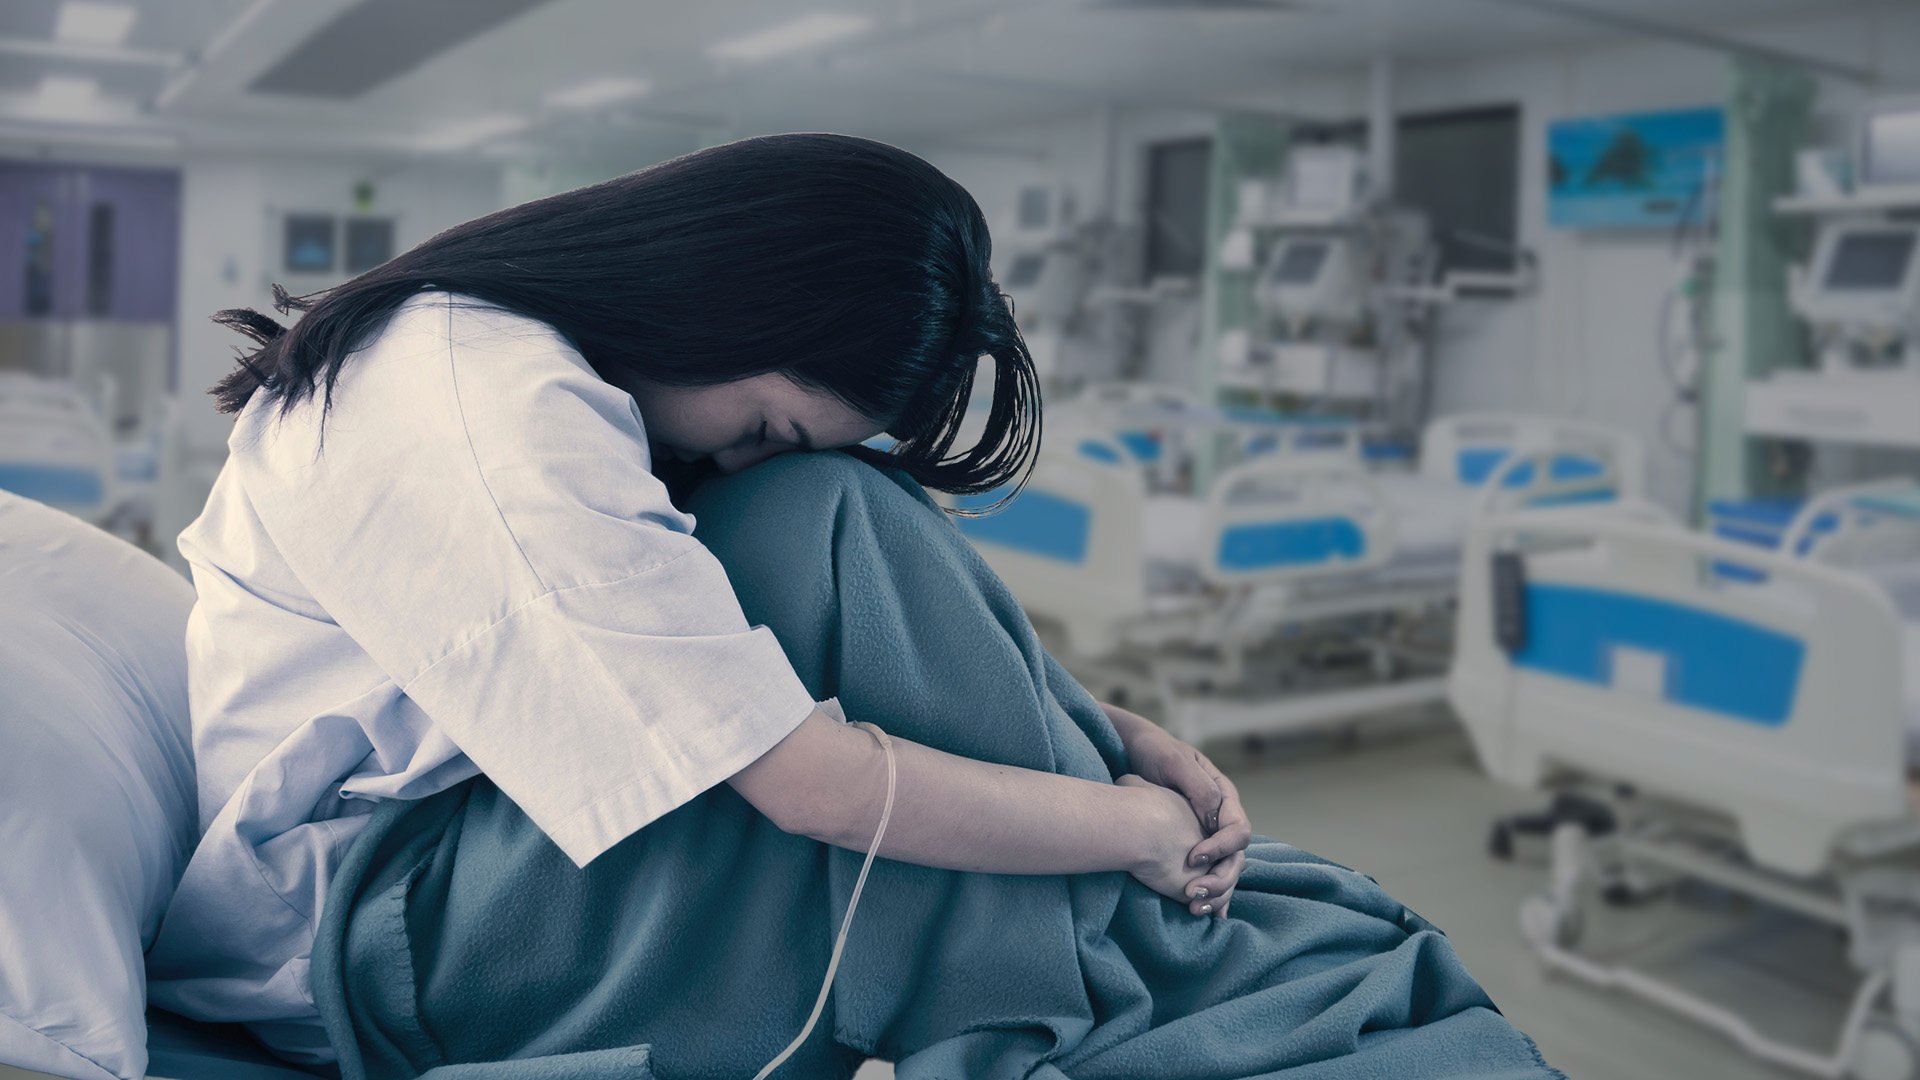 A 34-year-old woman was left trapped inside a psychiatric hospital in China for years after she was declared medically fit because her family refused to sign her discharge papers. Photo: SCMP composite/Shutterstock